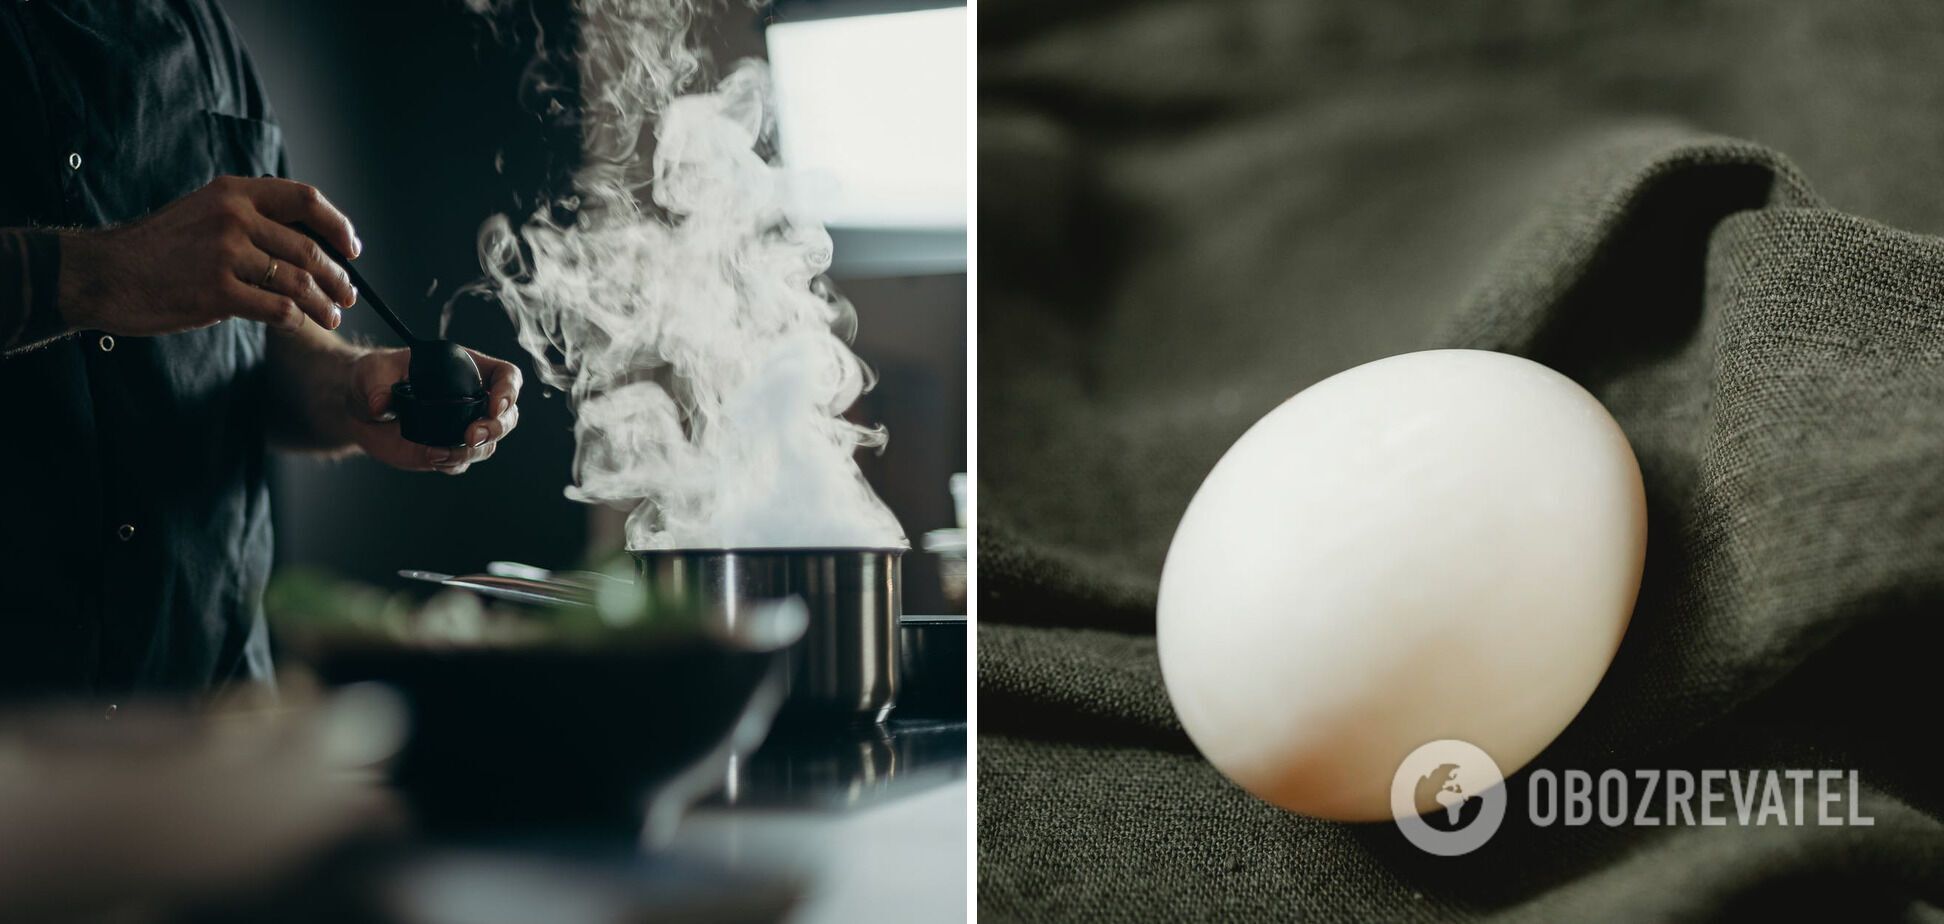 How to properly cook a poached egg so that it is whole